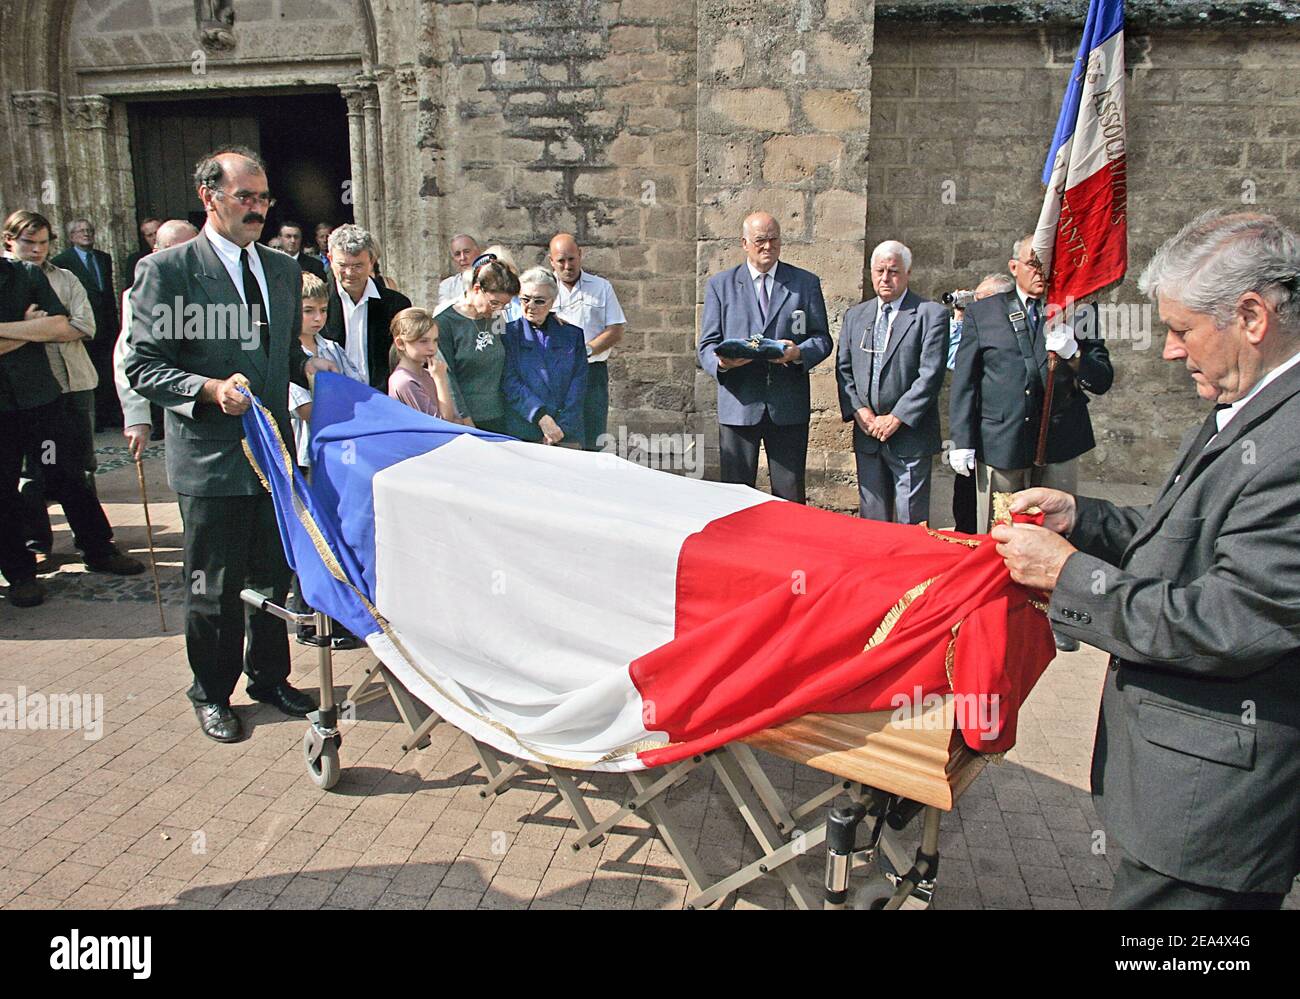 The funeral of the late French actor Jacques Dufilho held at the cathedral of Mirande, southwestern France, on August 31, 2005. Dufilho died on August 28 aged 91. Photo by Patrick Bernard/ABACAPRESS.COM. Stock Photo